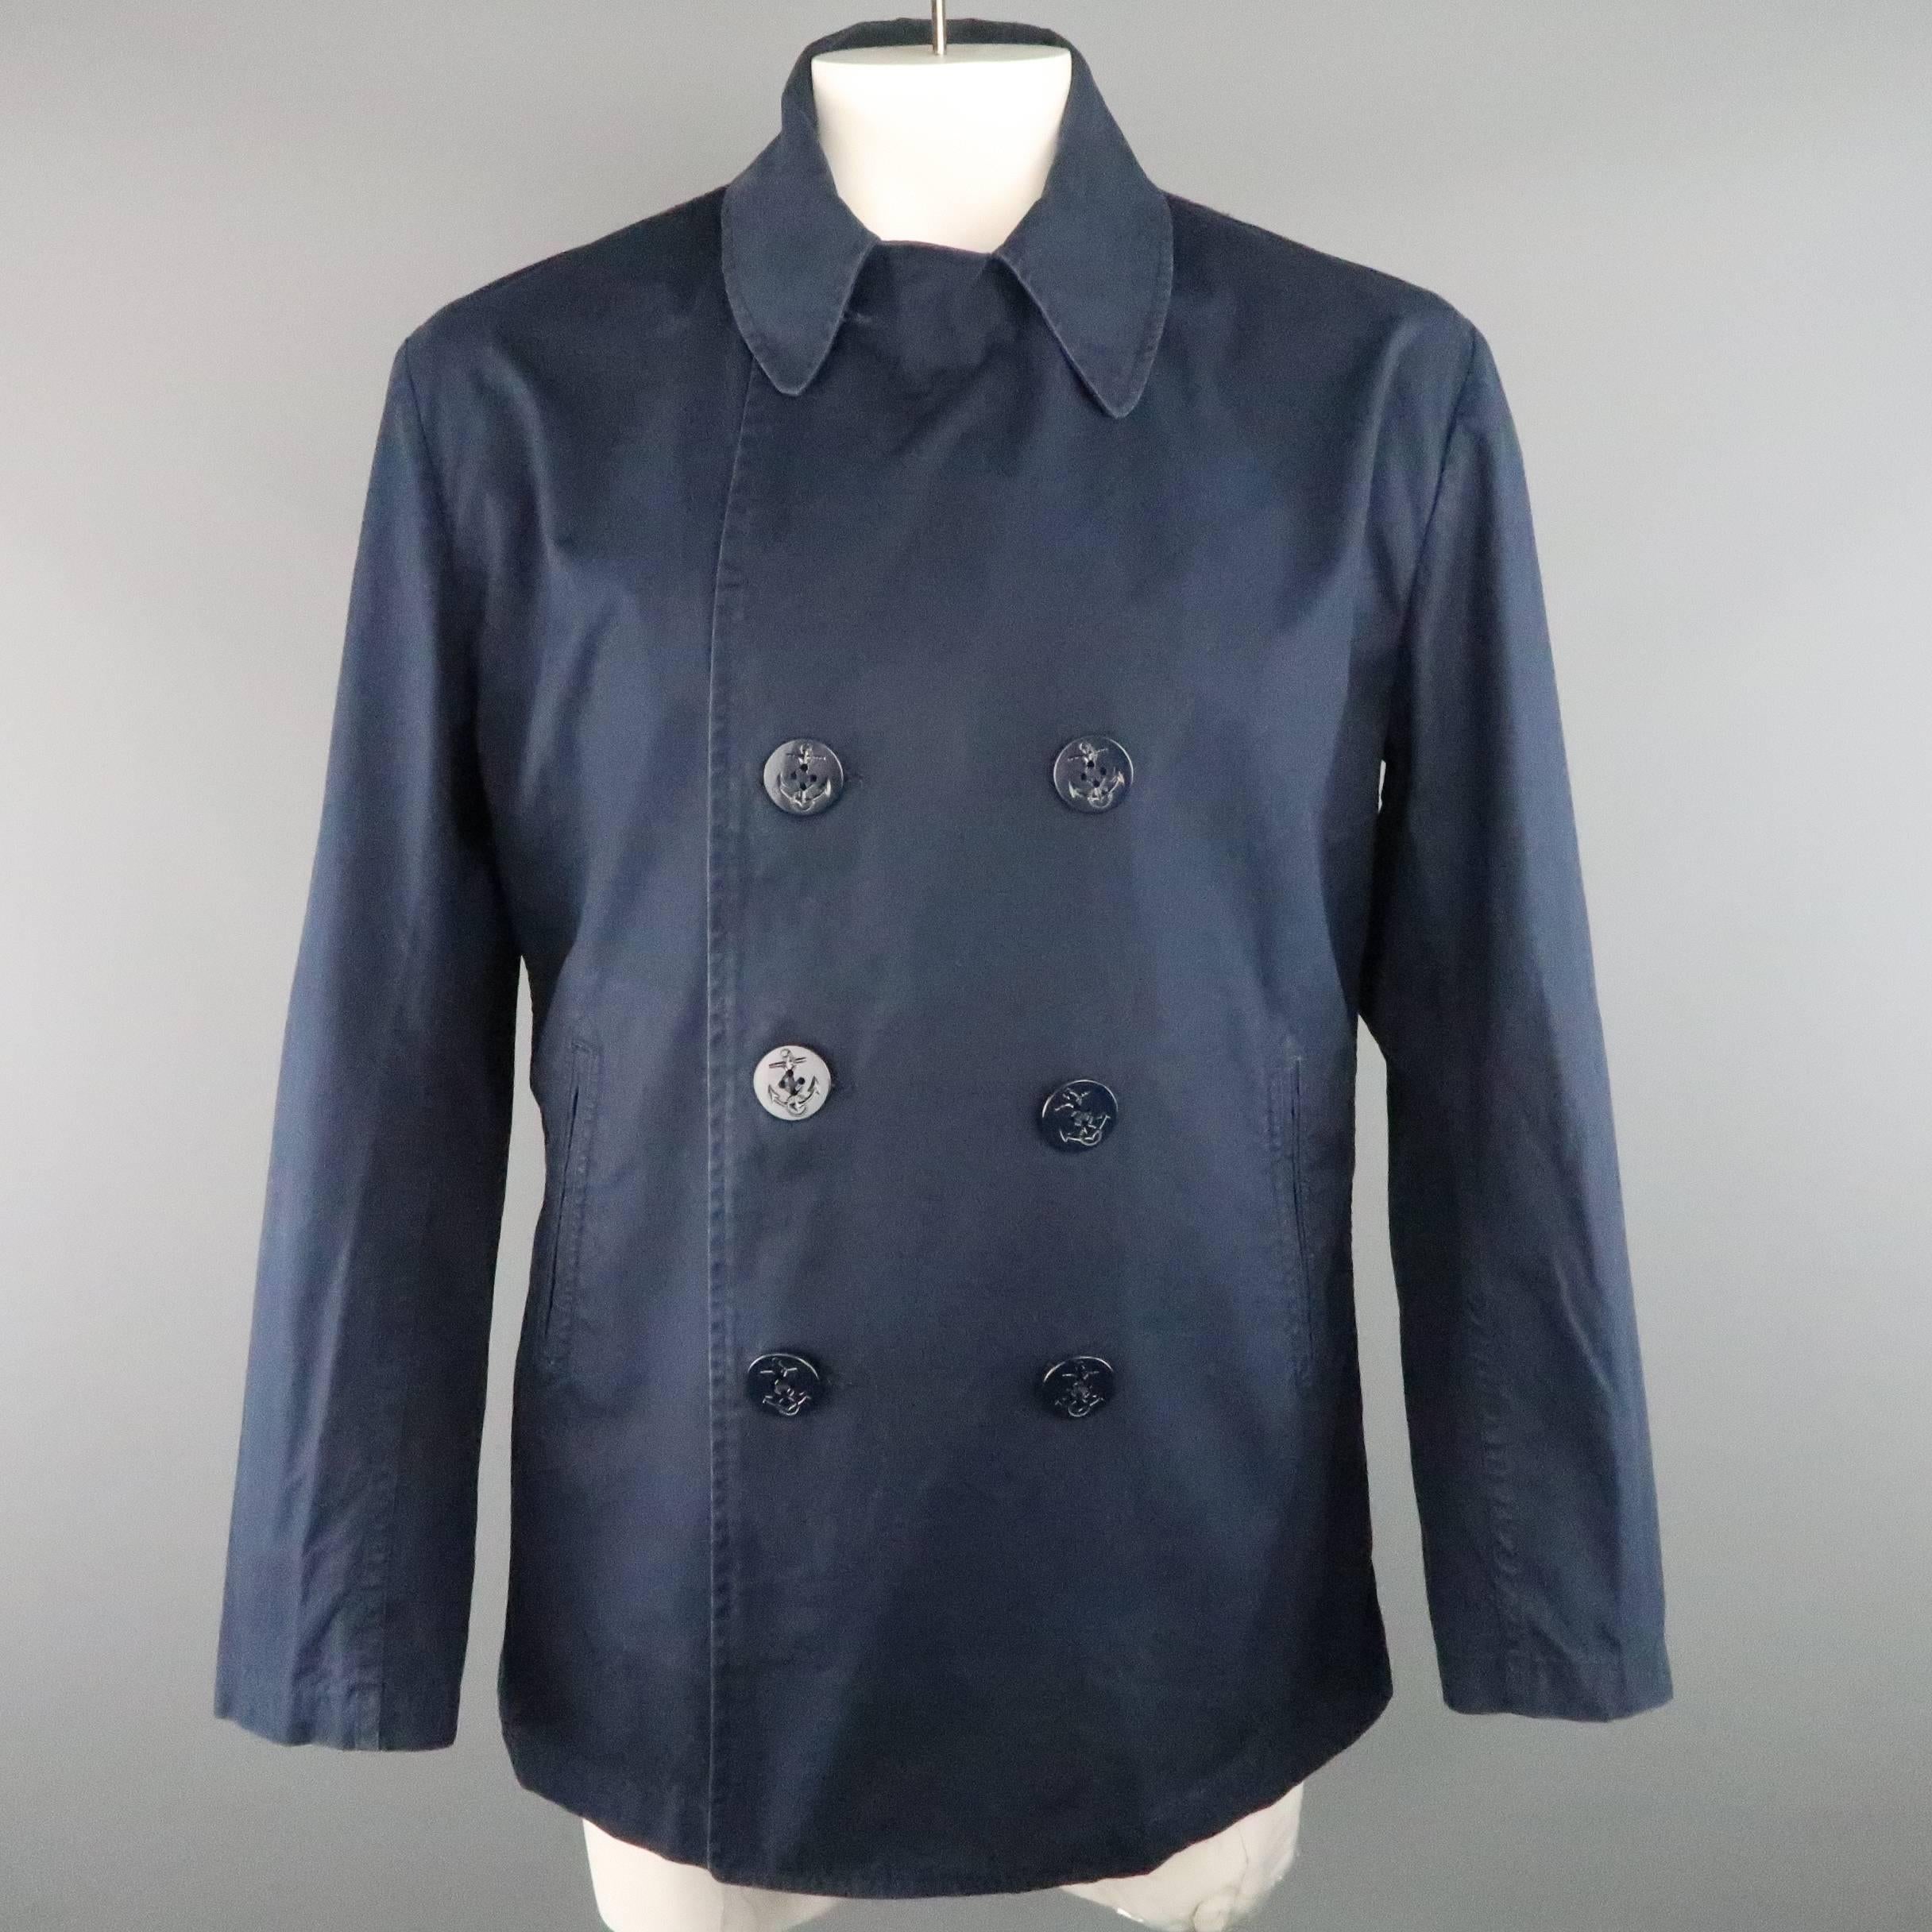 JUNYA WATANABE MAN COMME des GARCONS peacoat  comes in light weight navy blue cotton and features a classic pointed lapel, double breasted front with nautical anchor buttons, and slit pockets. Wear throughout. Made in Japan.
 
Fair Pre-Owned